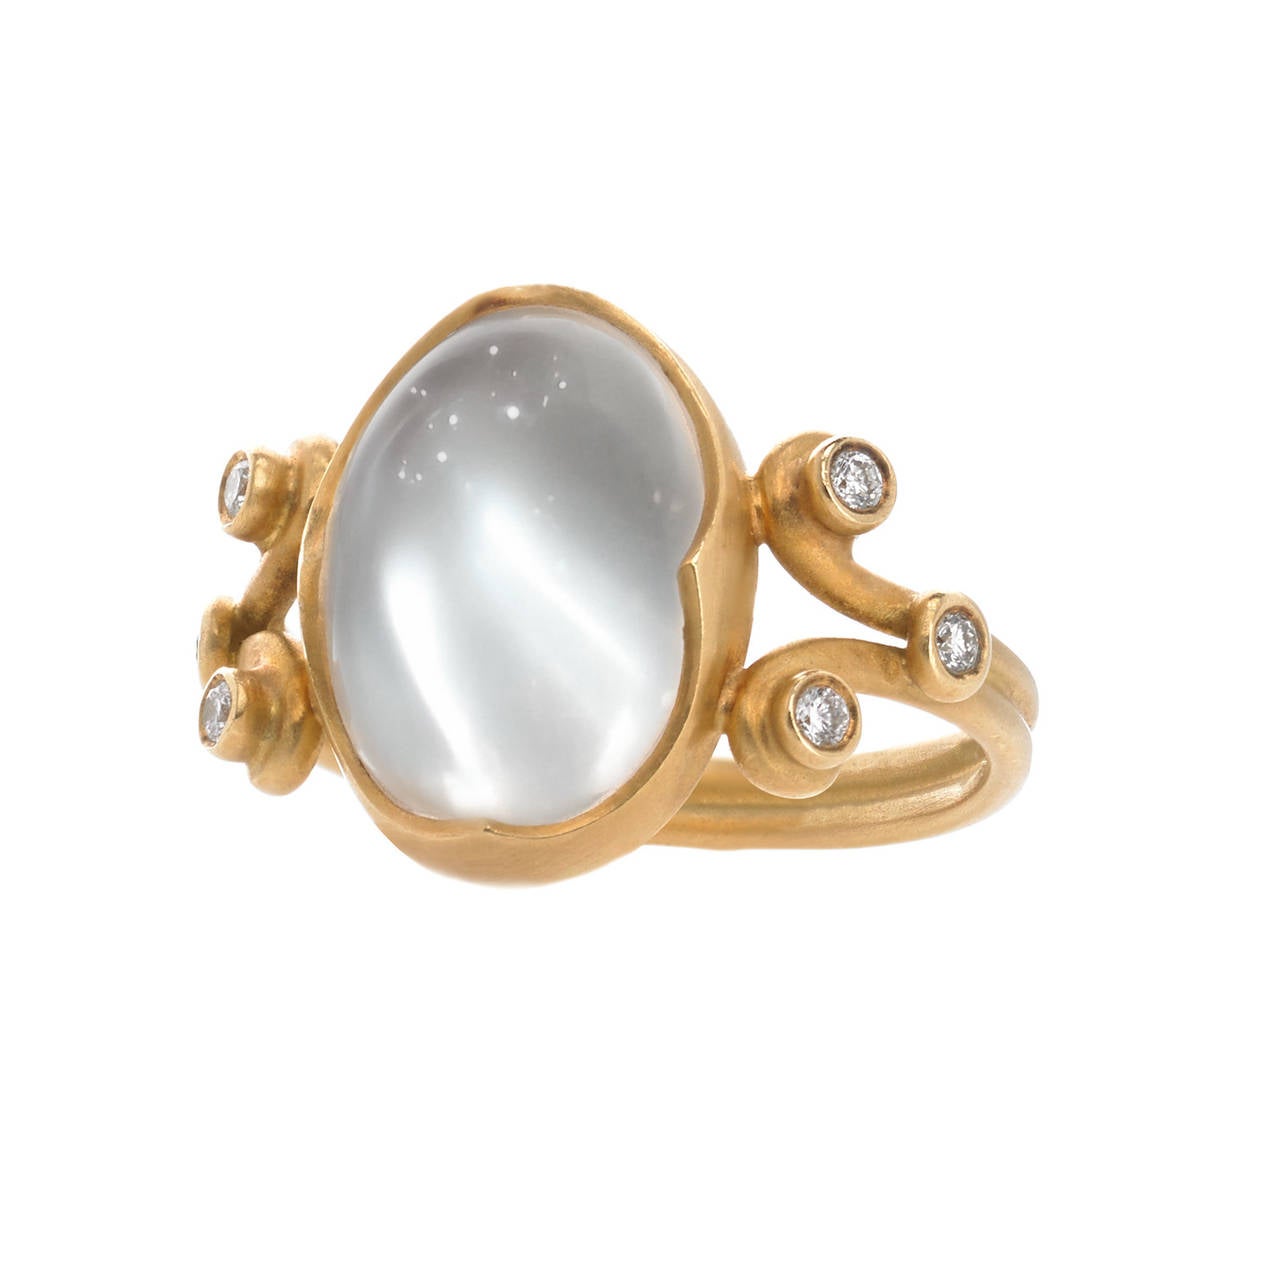 One-of-a-Kind Heavenly Ring handcrafted in matte-finished 18k yellow gold with a gorgeous 7.00 carat platinum moonstone and accenting by six white diamonds weighing a total of 0.24 carats. Size 6.5 (can be sized)